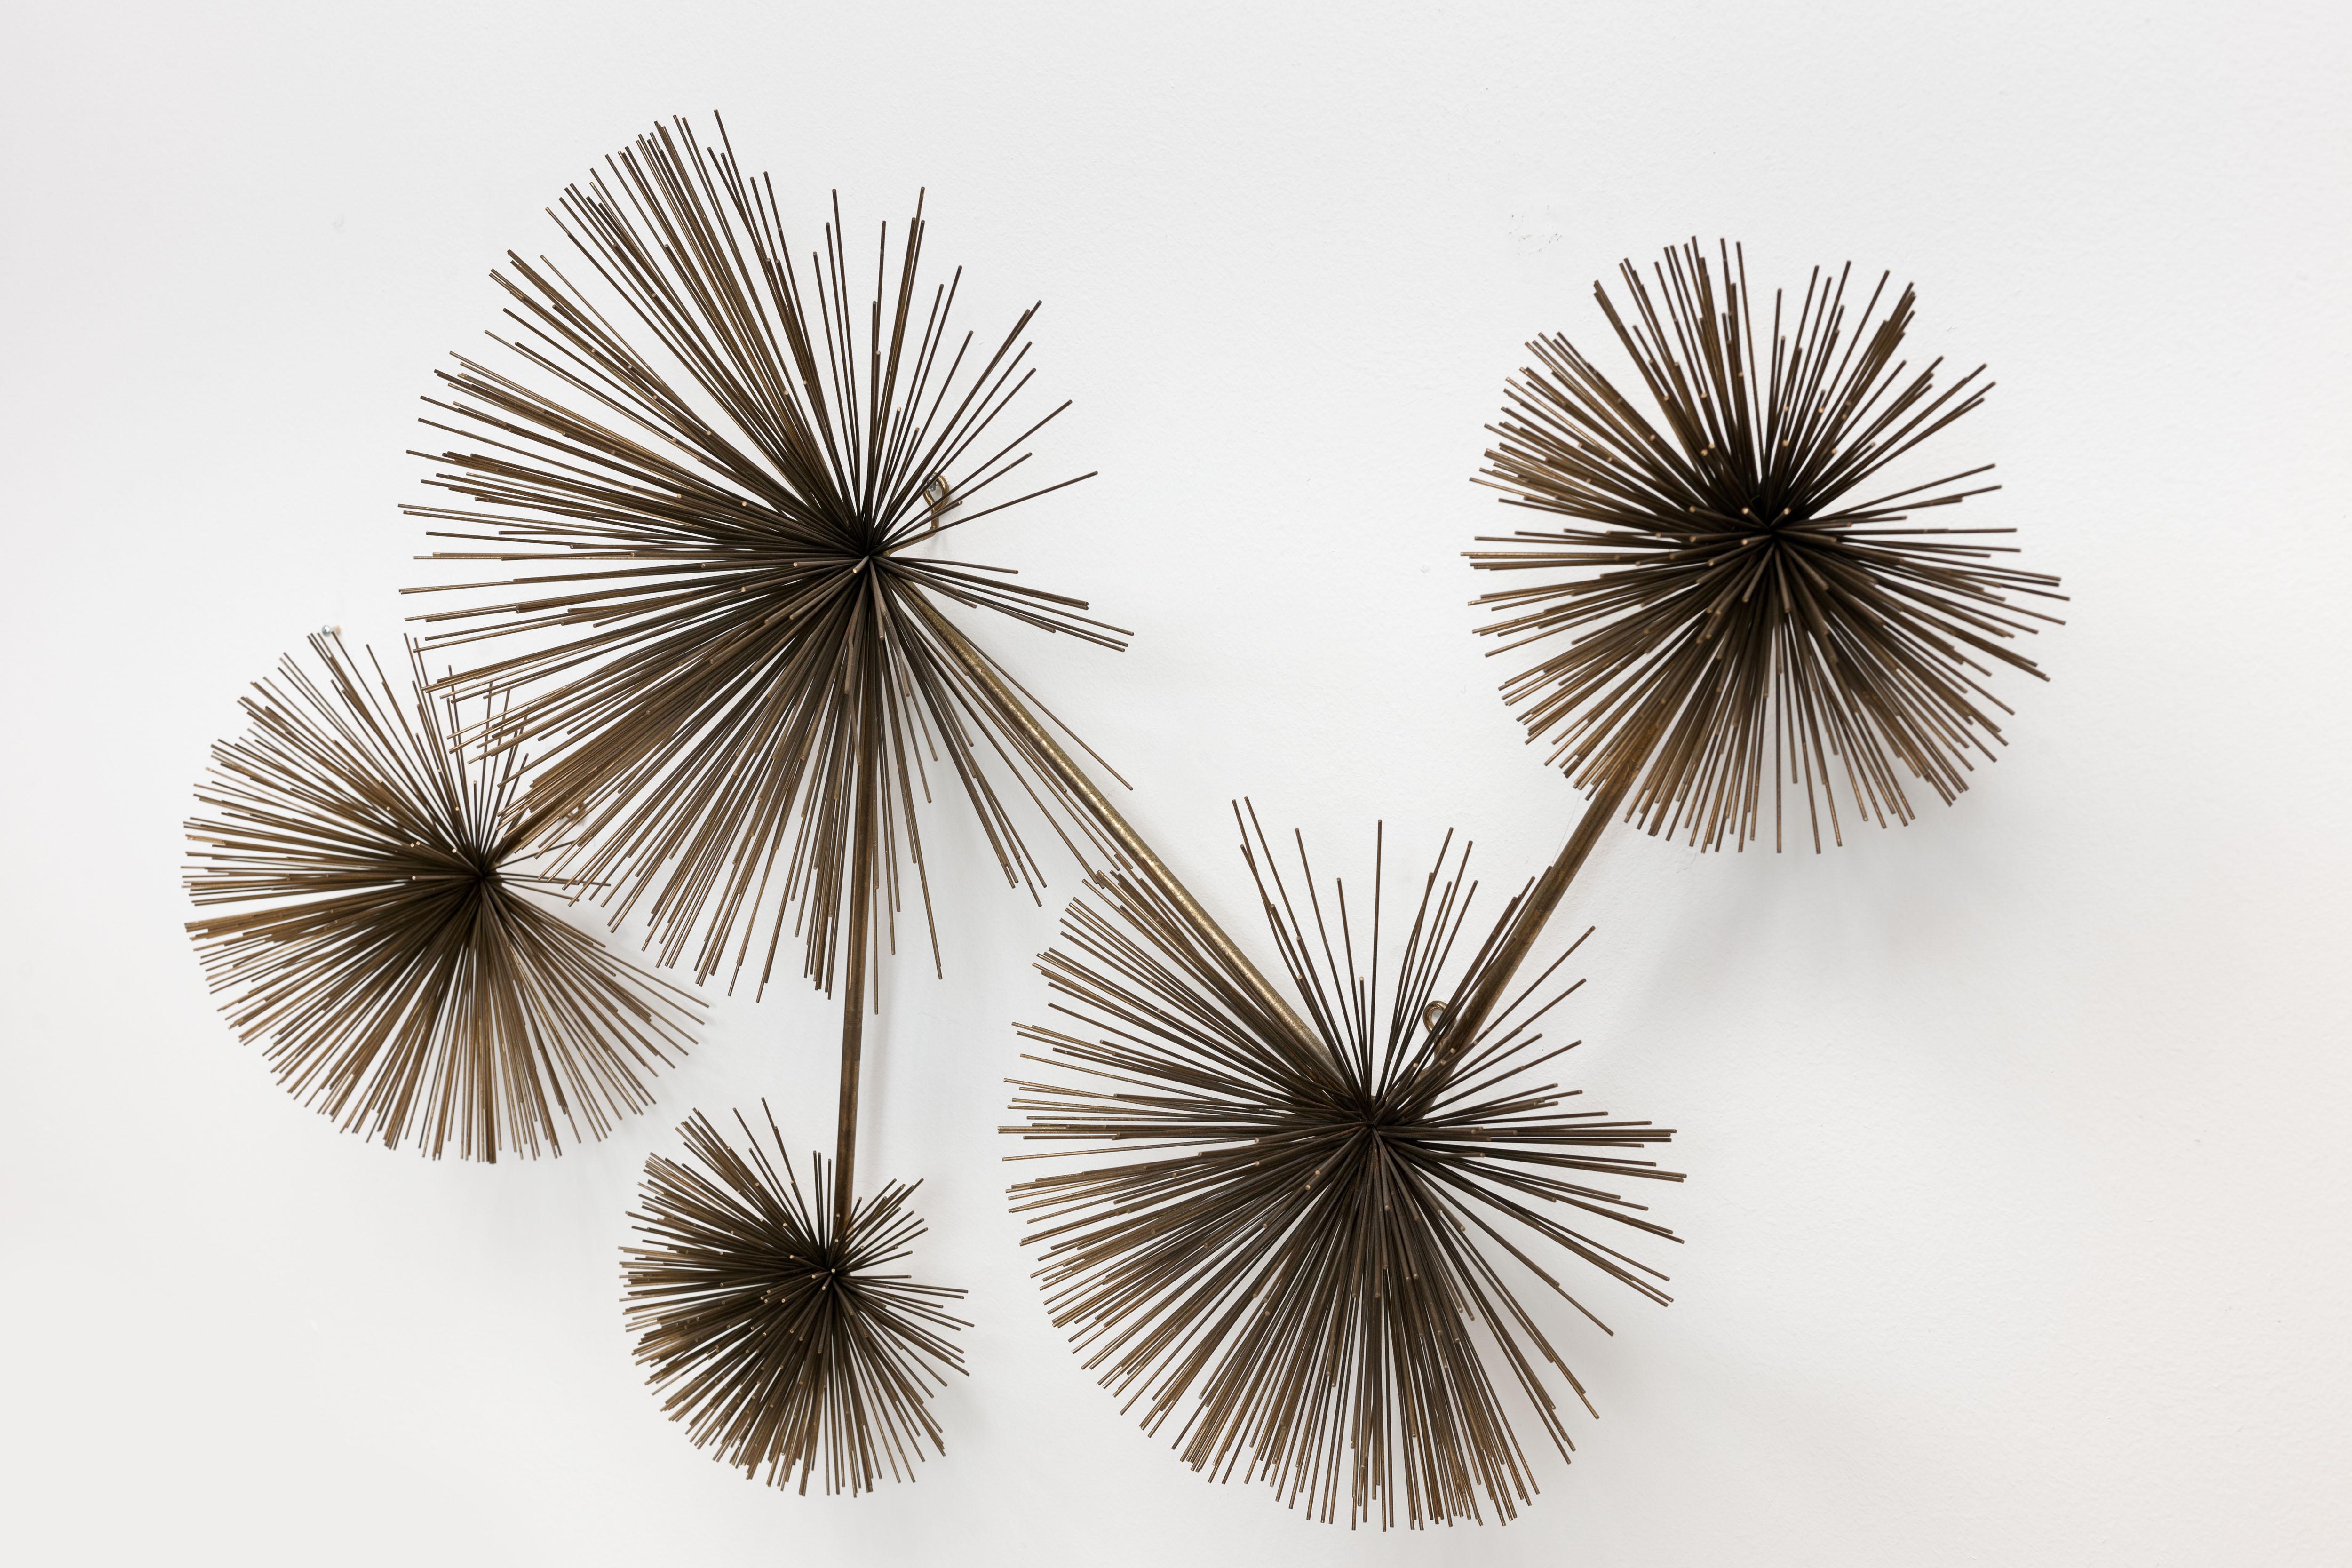 Late 20th Century Brass Curtis Jere 'Pom Pom' Wall Sculpture, Fully Signed C. Jere, 1979